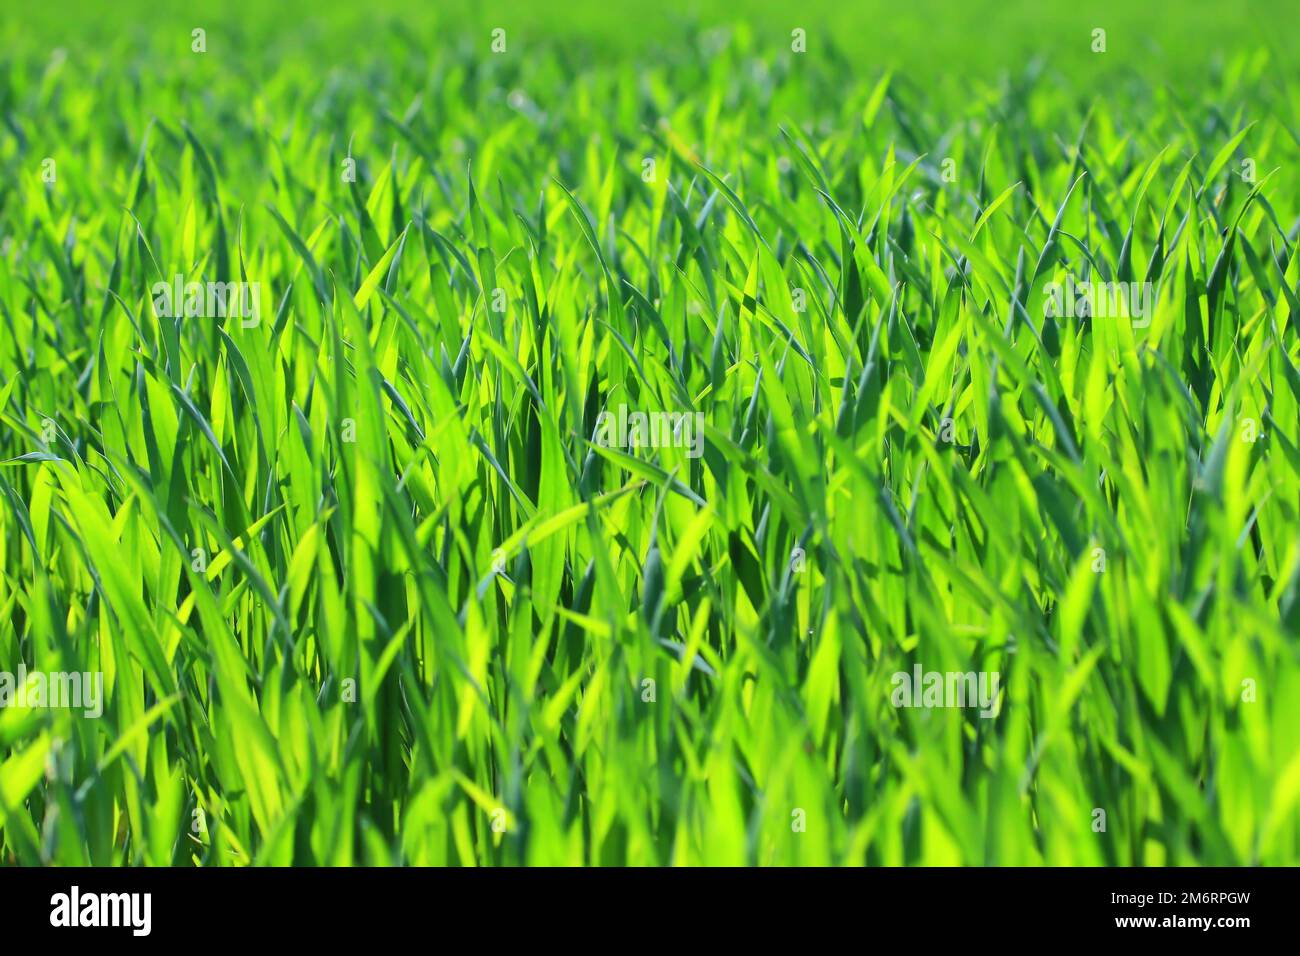 Grass as a green background Stock Photo